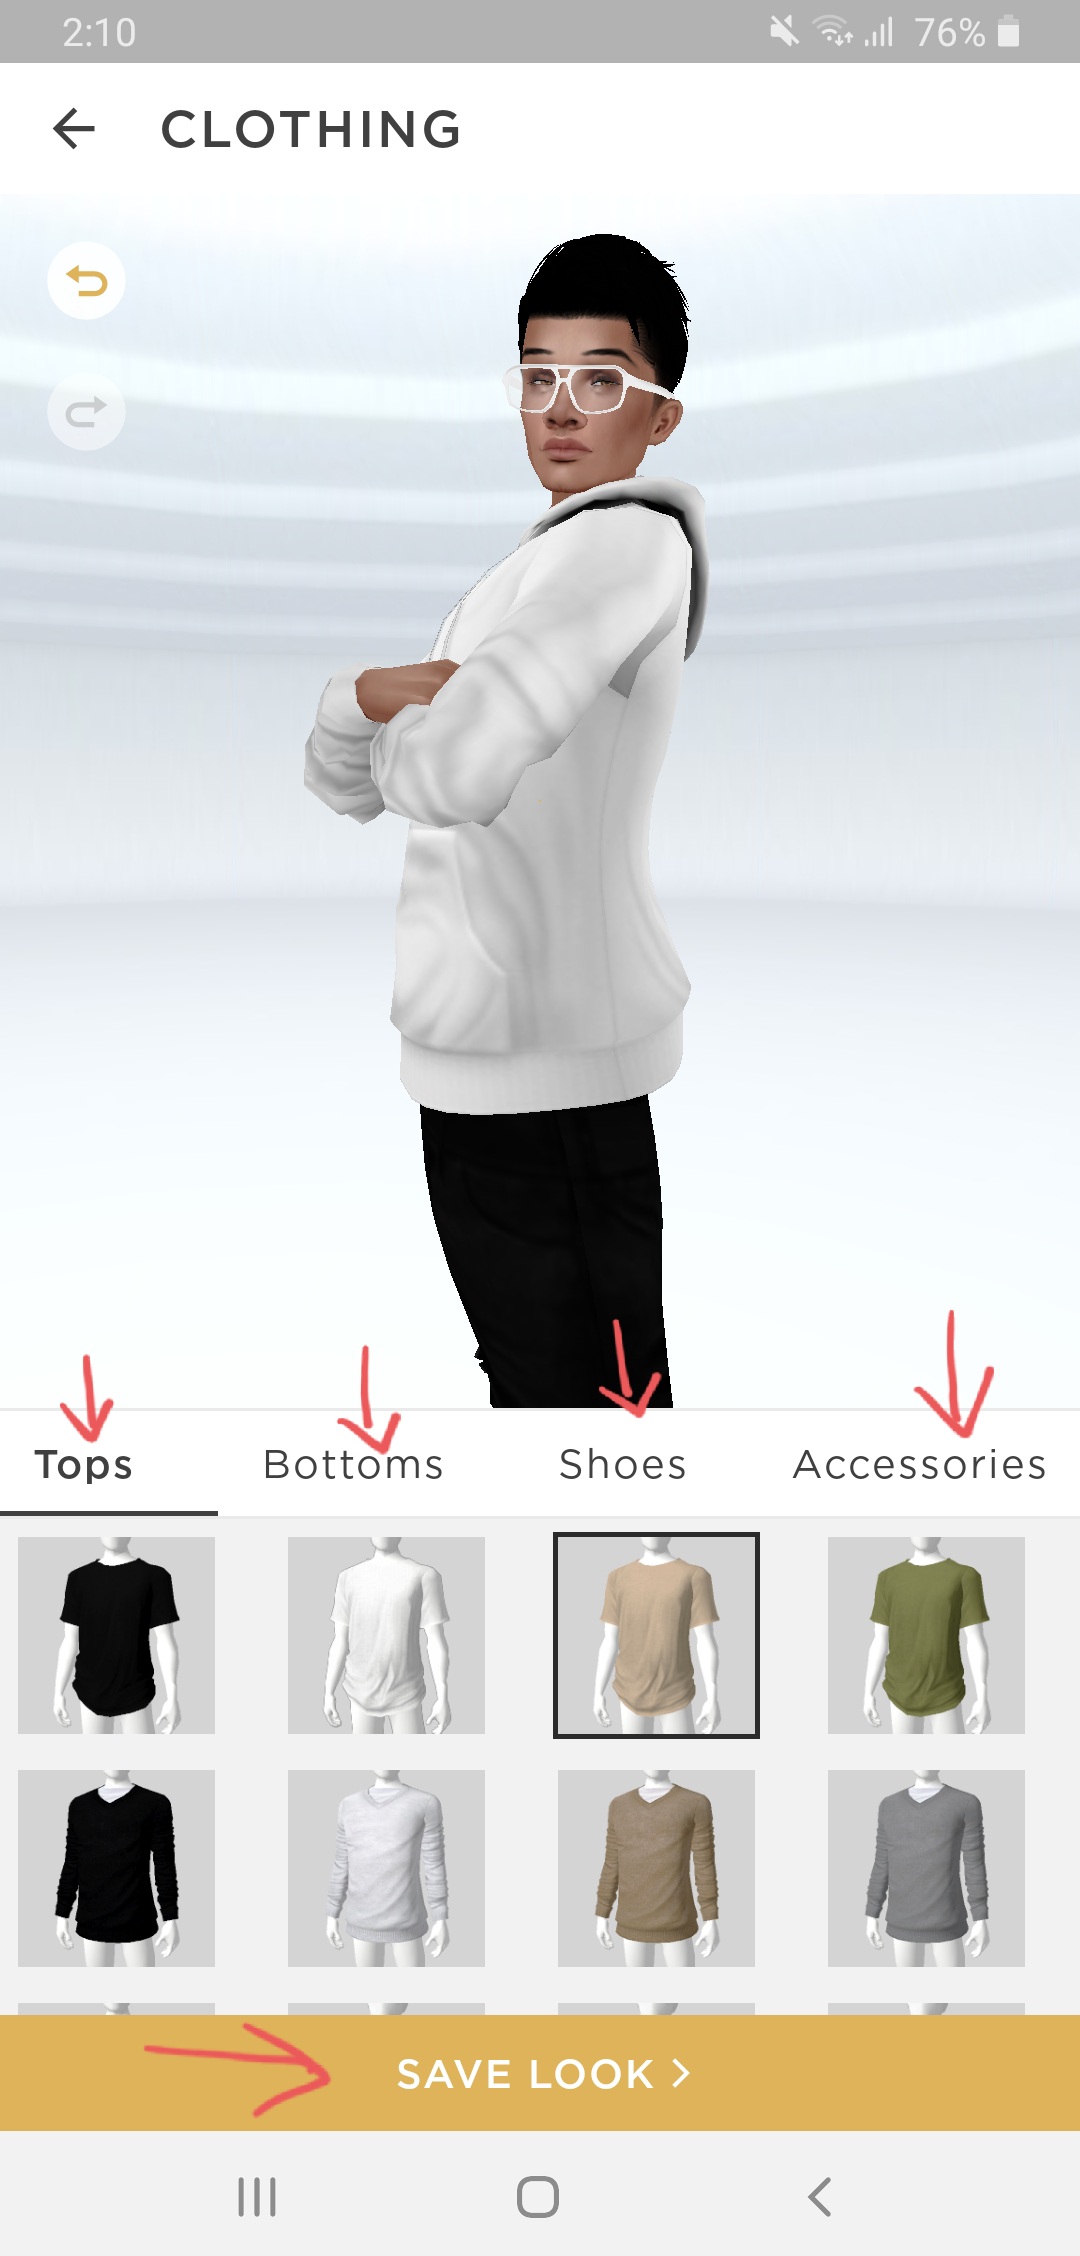 Then select the clothing style